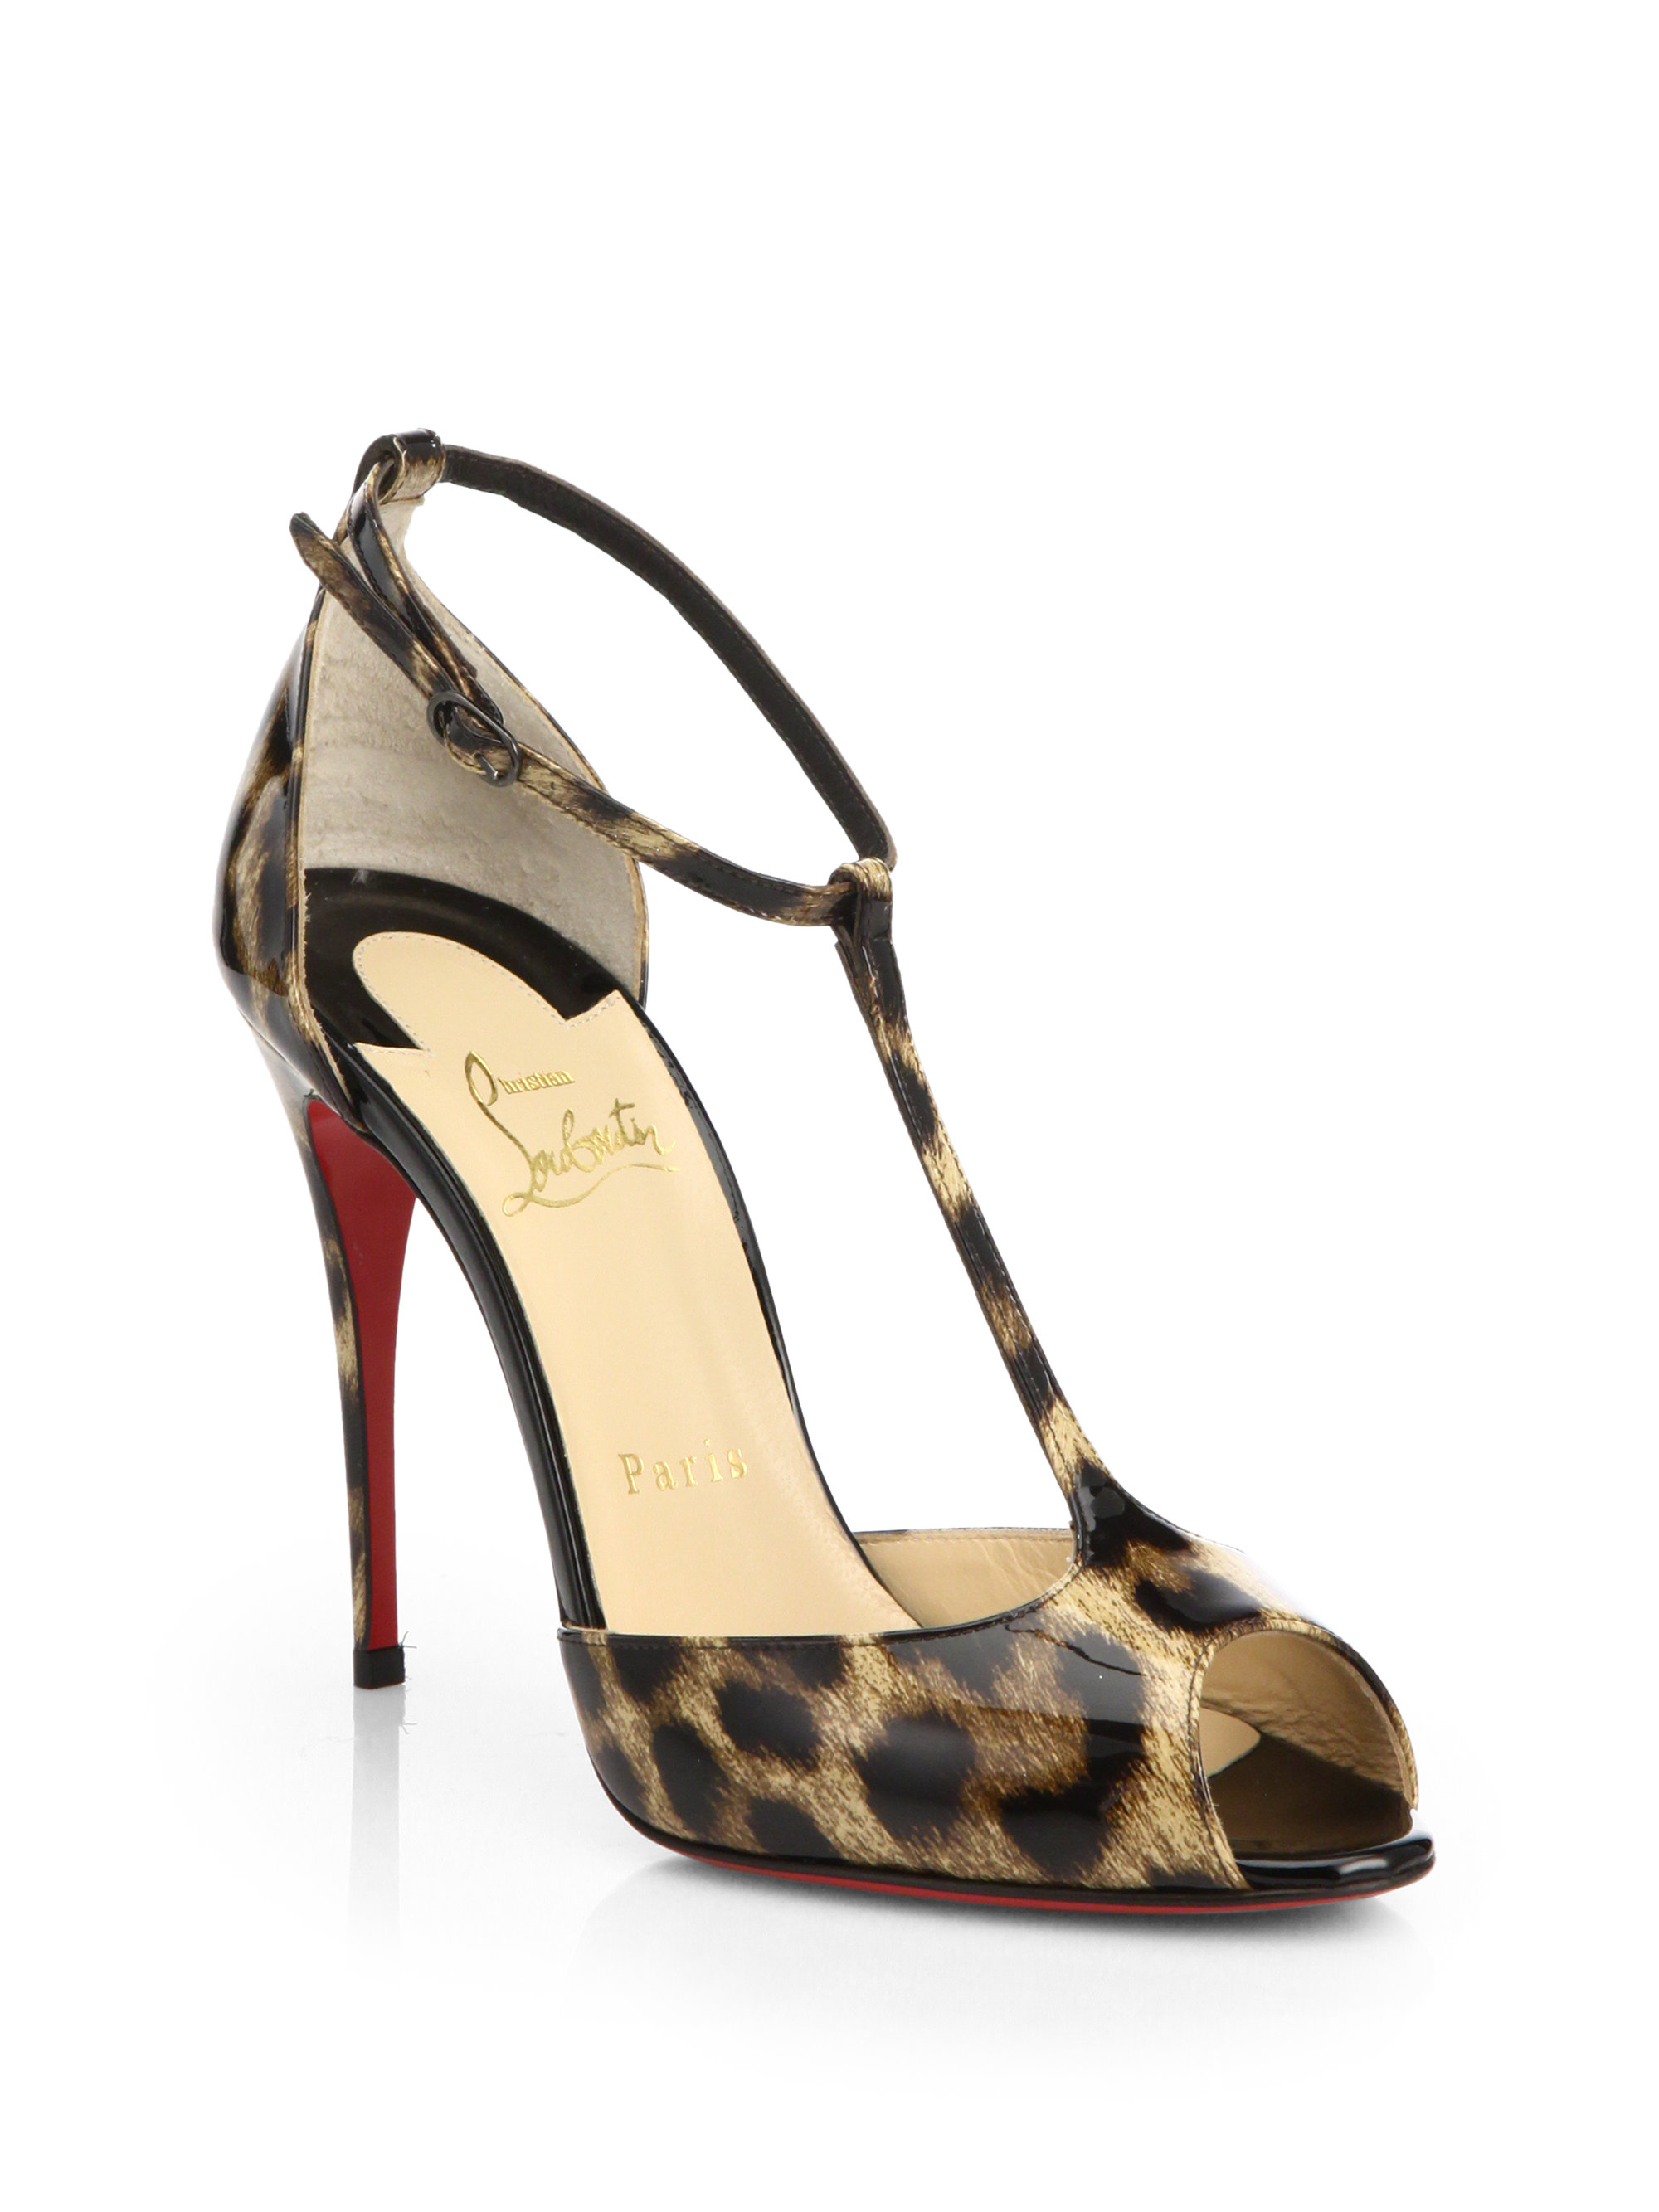 christian louboutin bow-embellished pumps, knock off louis vuitton shoes